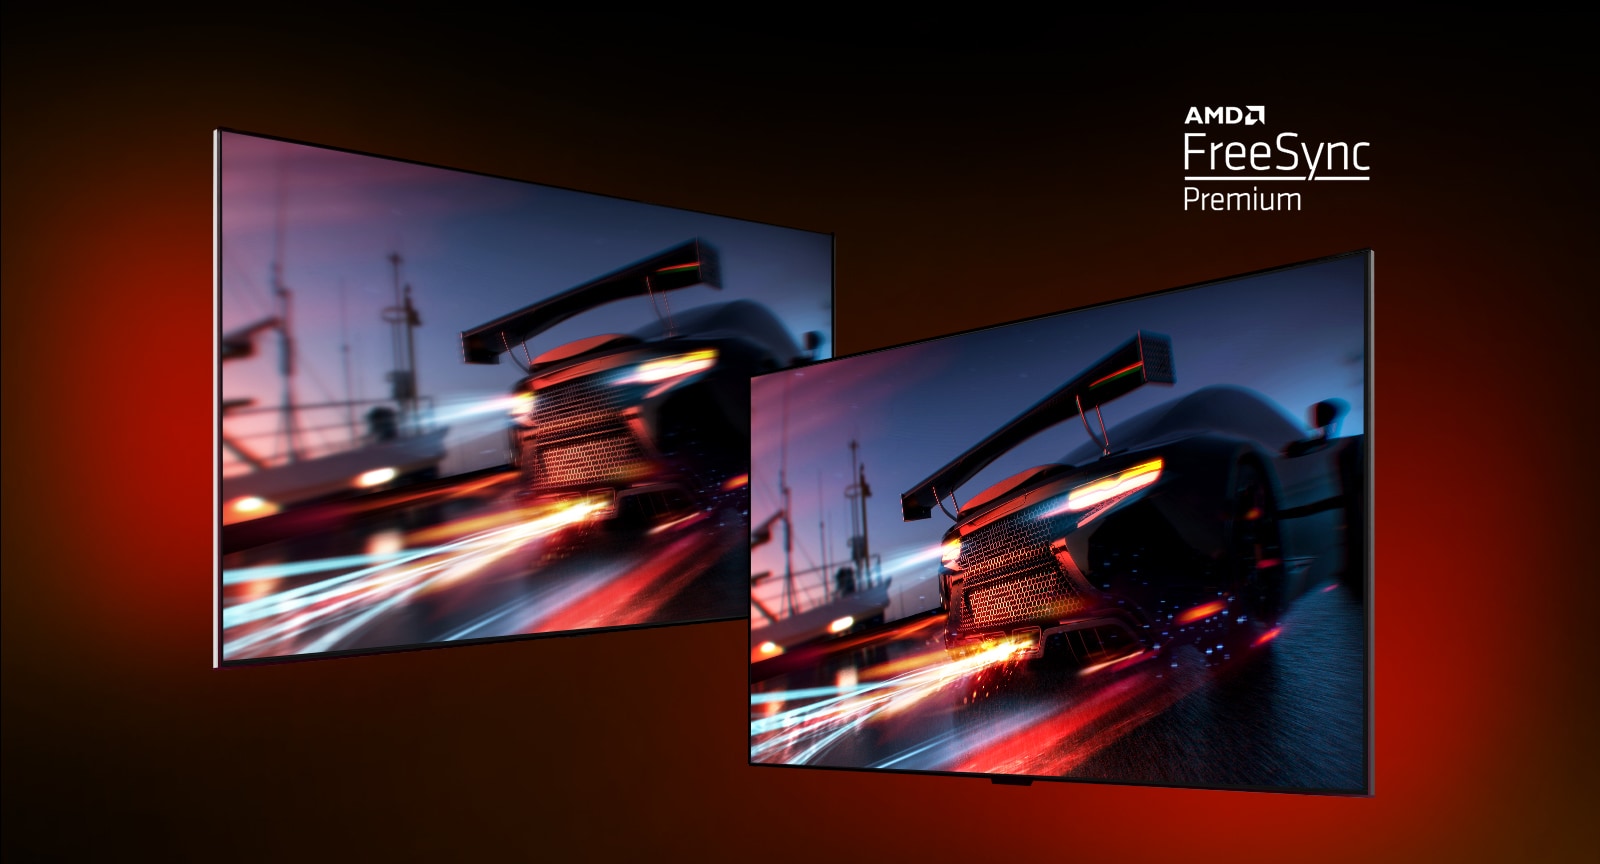 There are two televisions: on the left is a scene from the FORTNITE game with a racing car. The same scene from the game is also shown on the right but with a clearer and brighter image. The AMD FreeSync Premium logo is displayed in the upper right corner. 